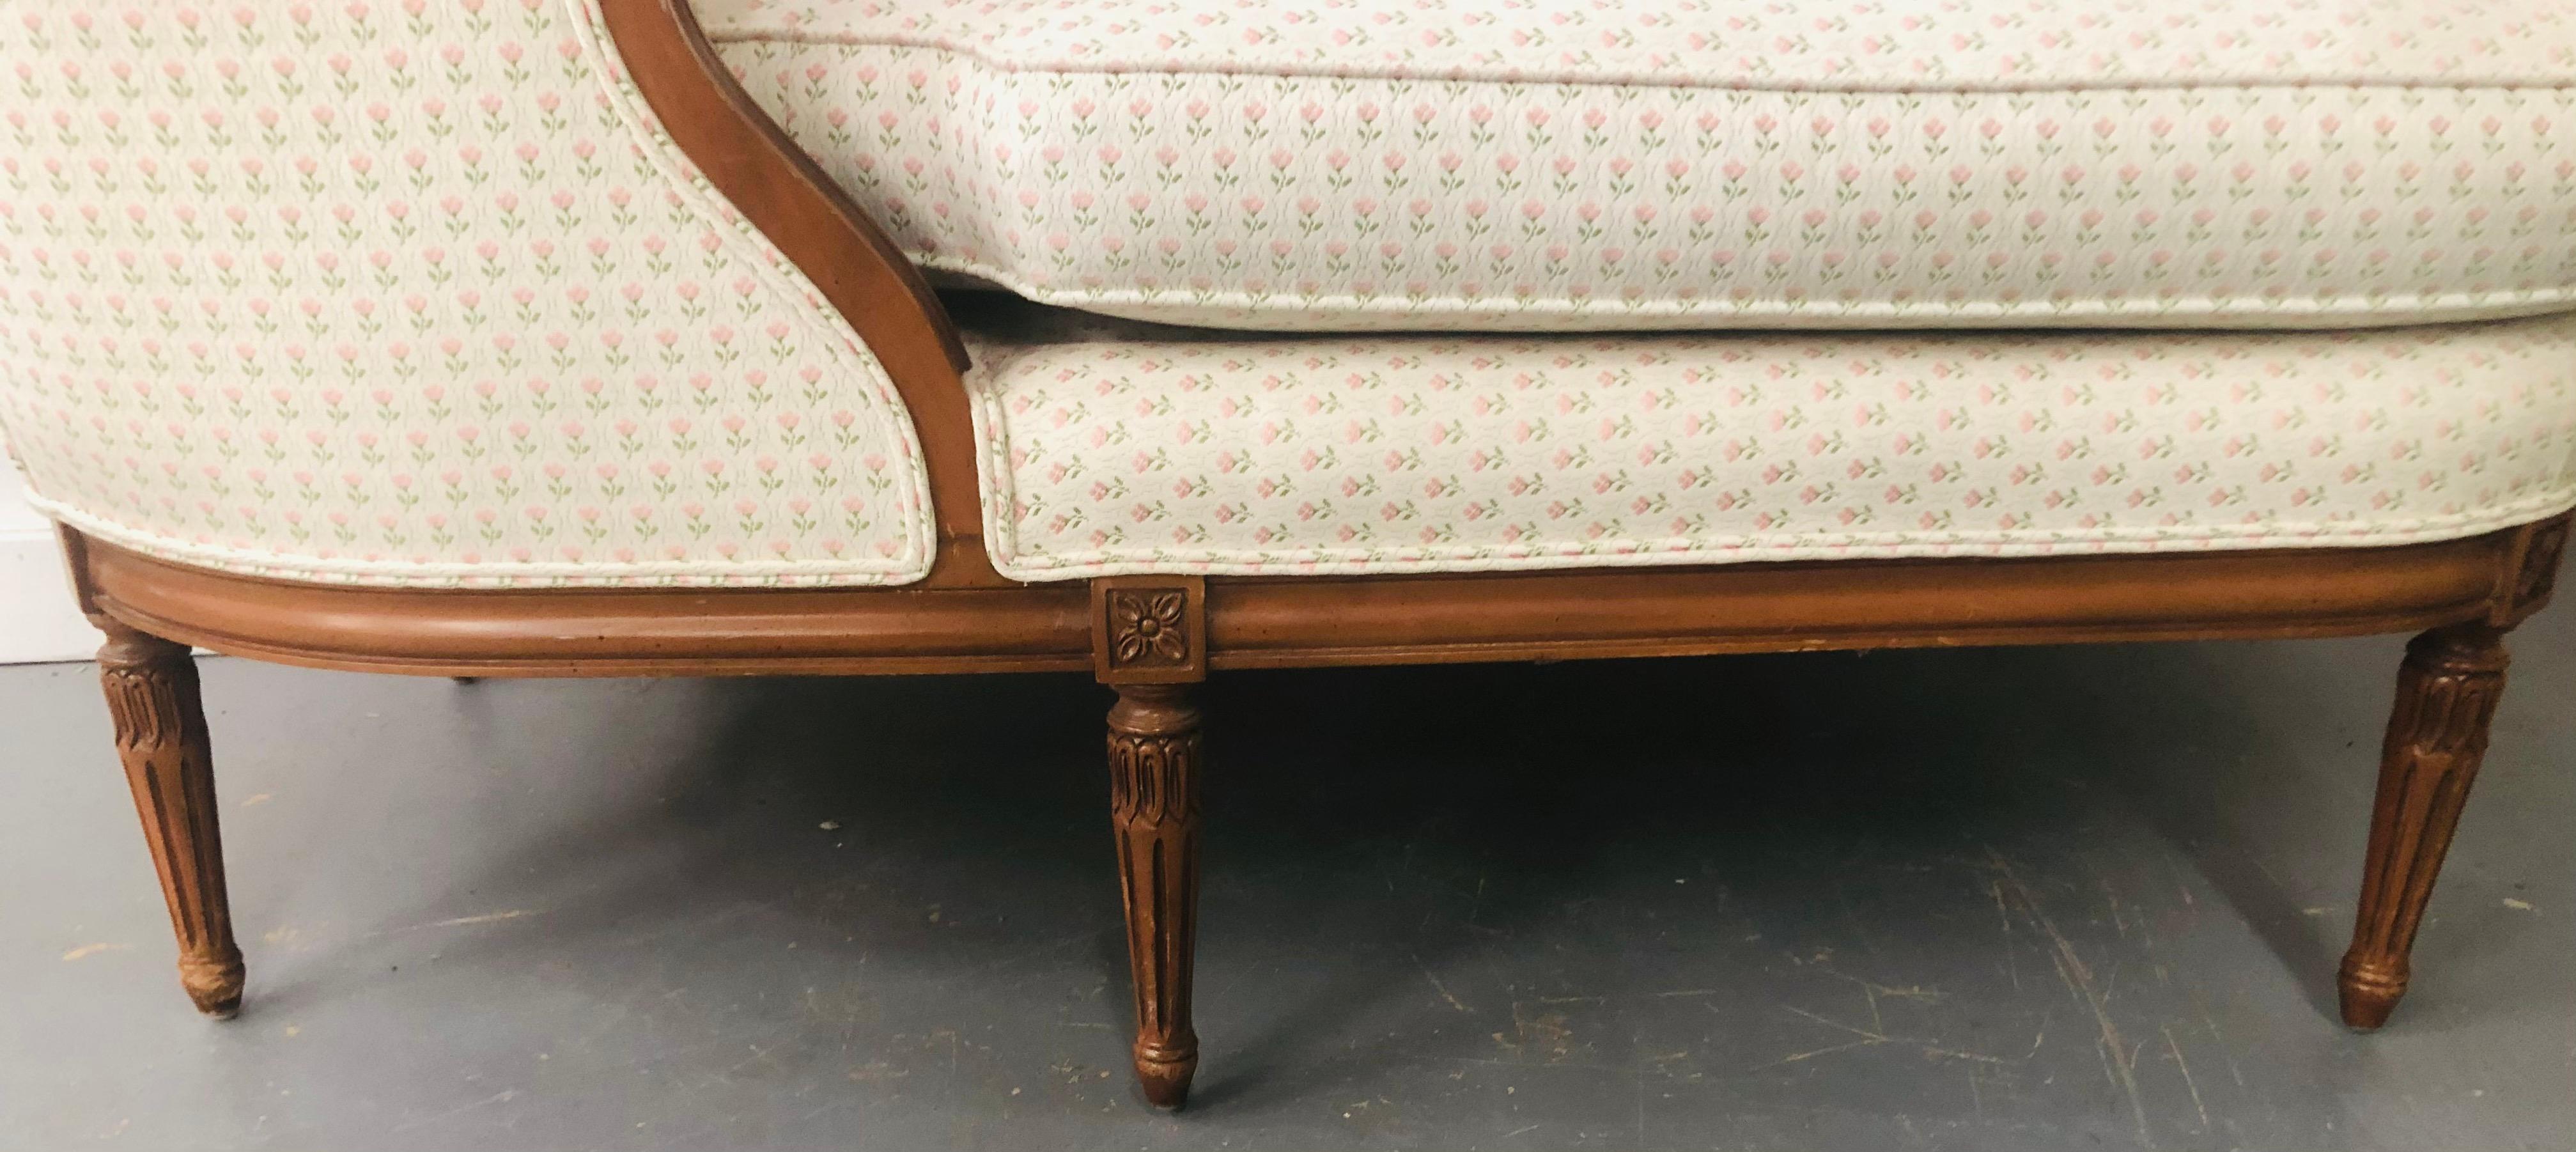 19th Century French Louis XVI Style Chaise Lounge, Sofa or Daybed 7